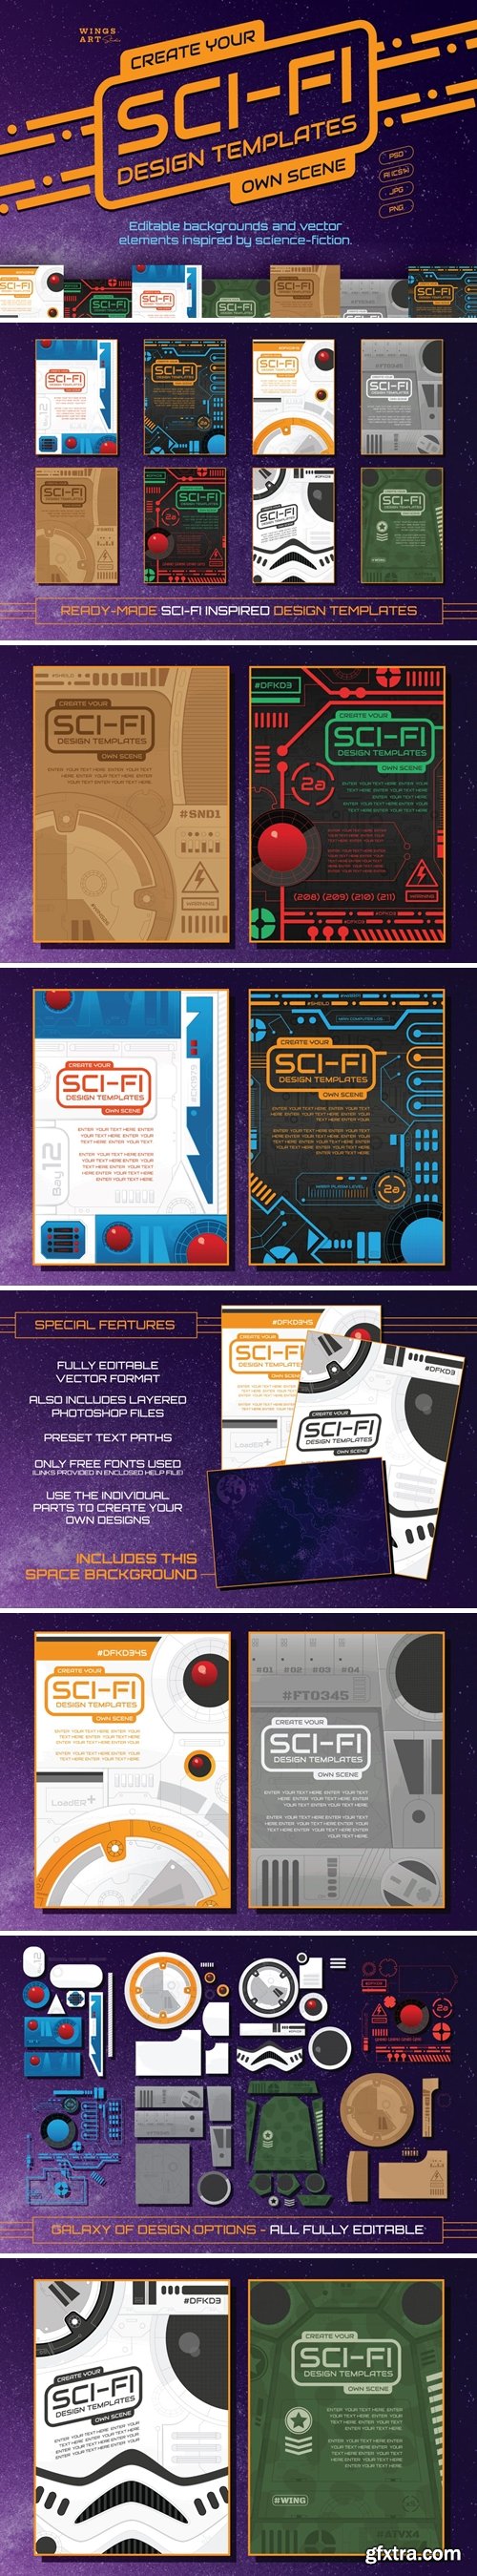 Sci-Fi Icons and Templates